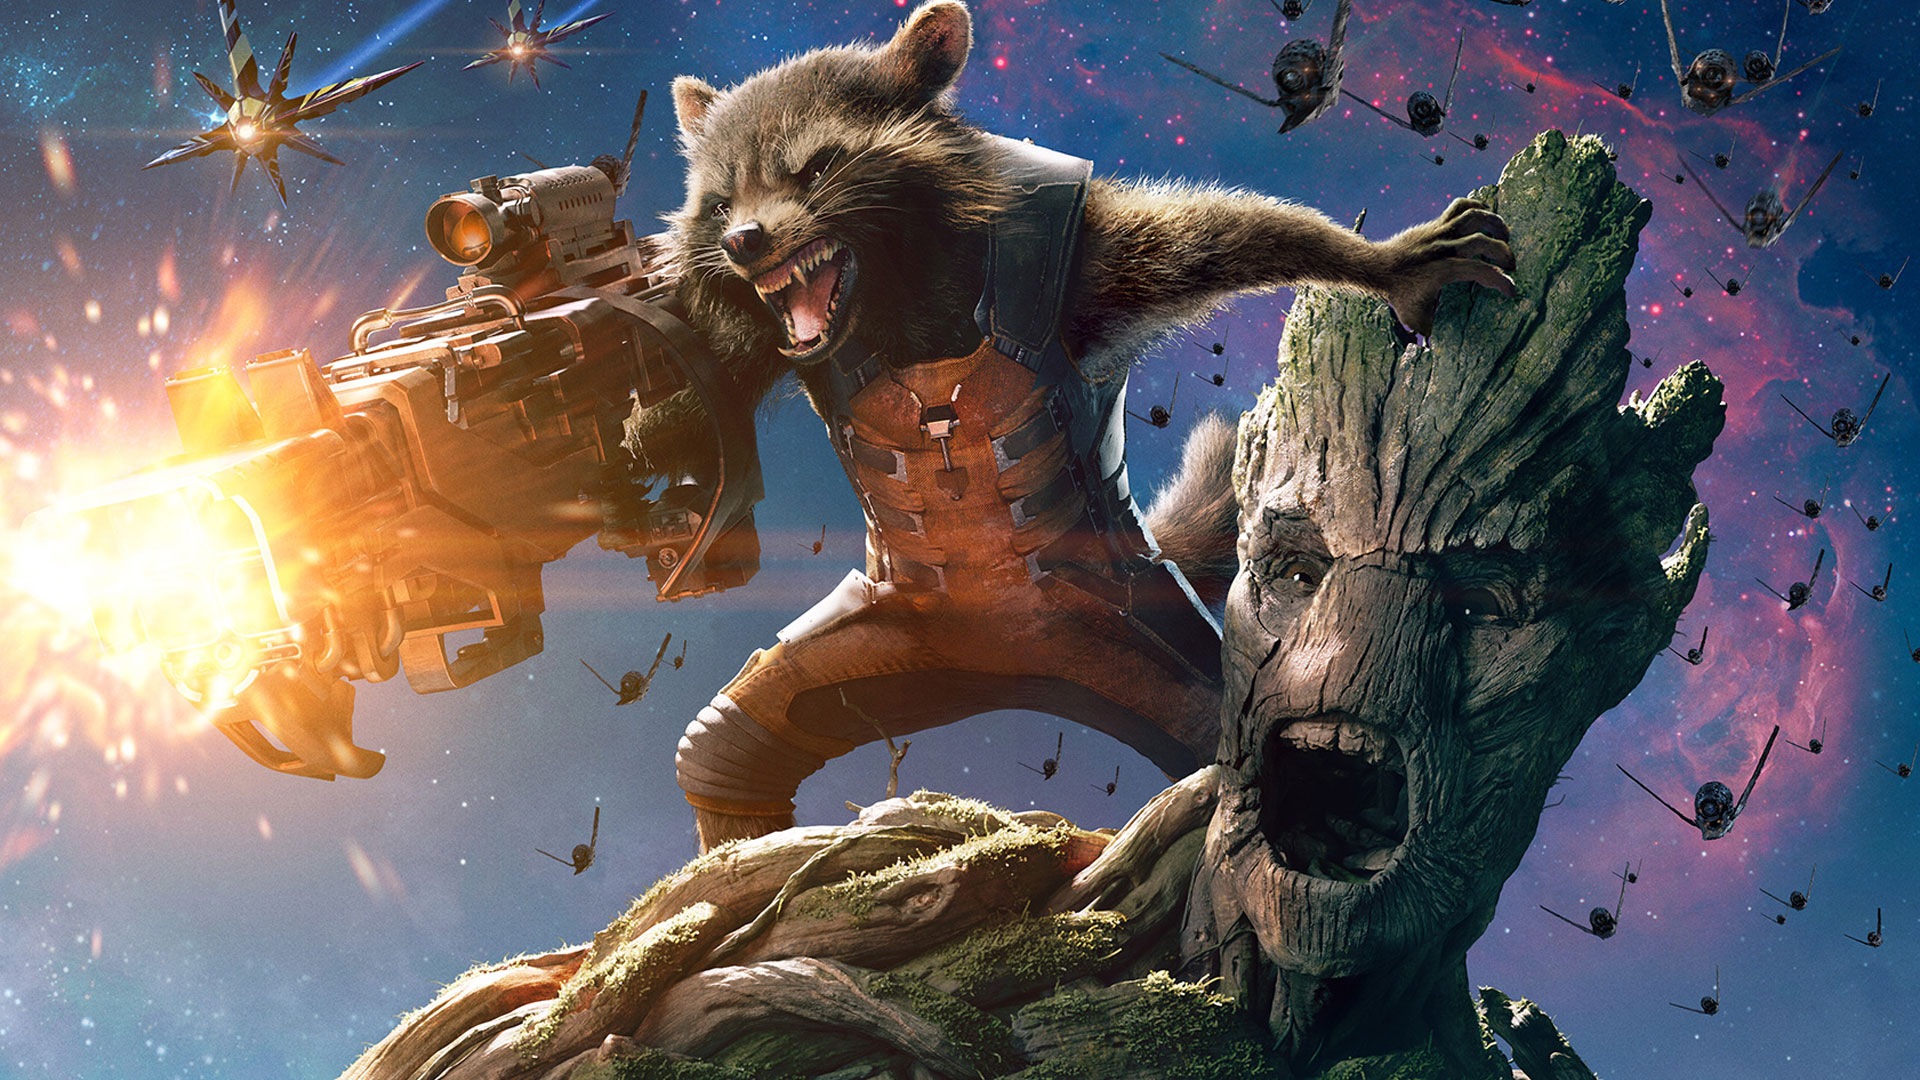 Guardians of the Galaxy 2014 HD movie wallpapers #14 - 1920x1080